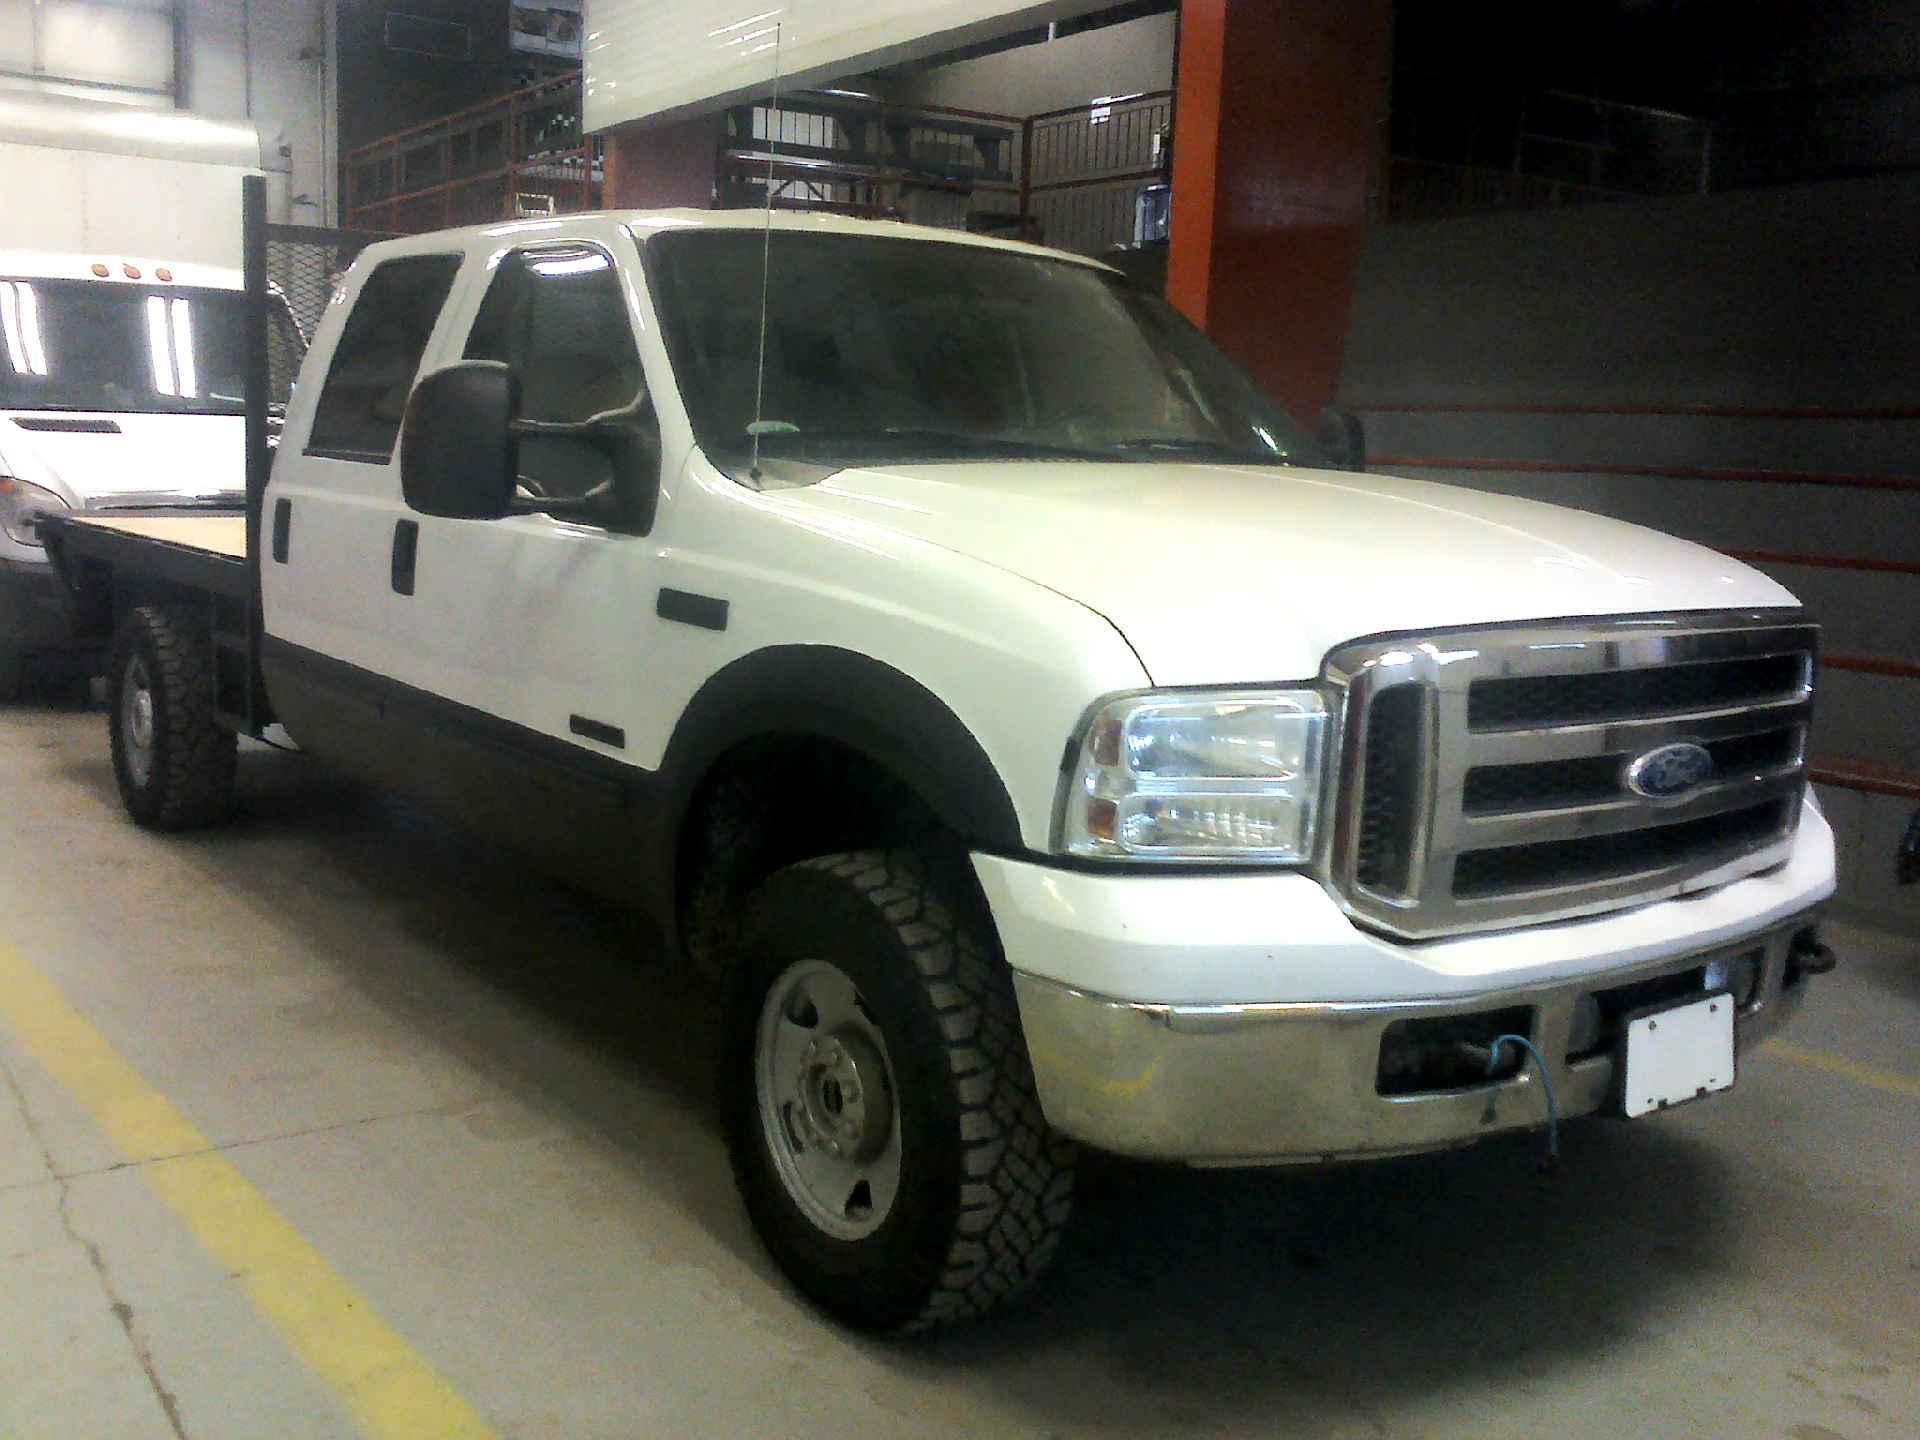 2005 FORD F-350 SD XLT CREW CAB 4WD 6.0L V8 OHV 32V TURBO DIESEL AUTOMATIC SN:1FTWW31P15EA94079 - Image 3 of 8